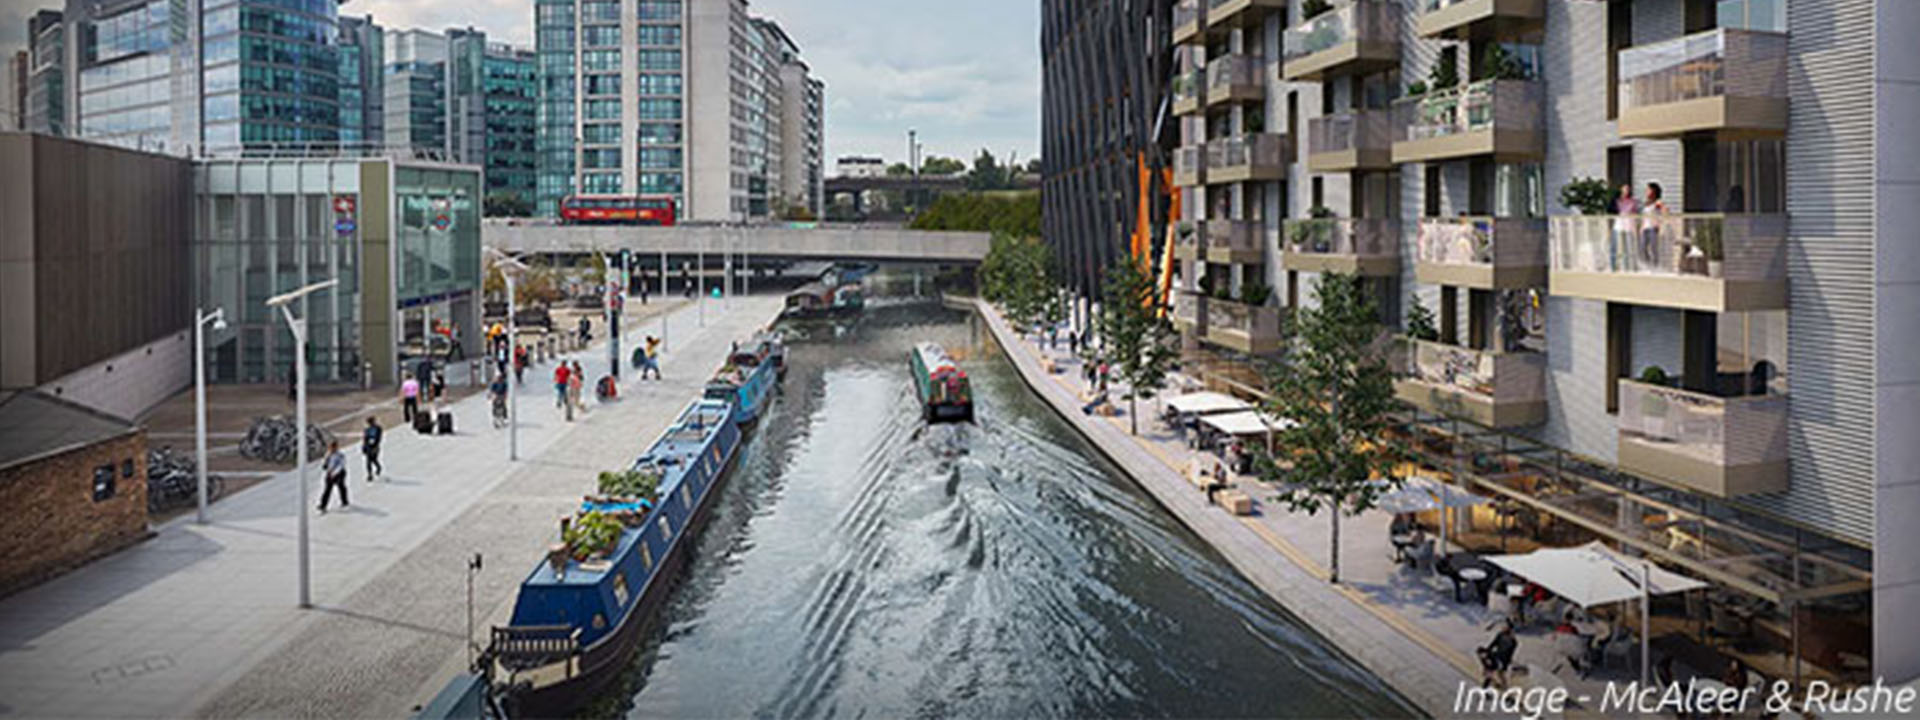 Project Update: Bailey Streetscene secures phase 2 of project in the heart of London.